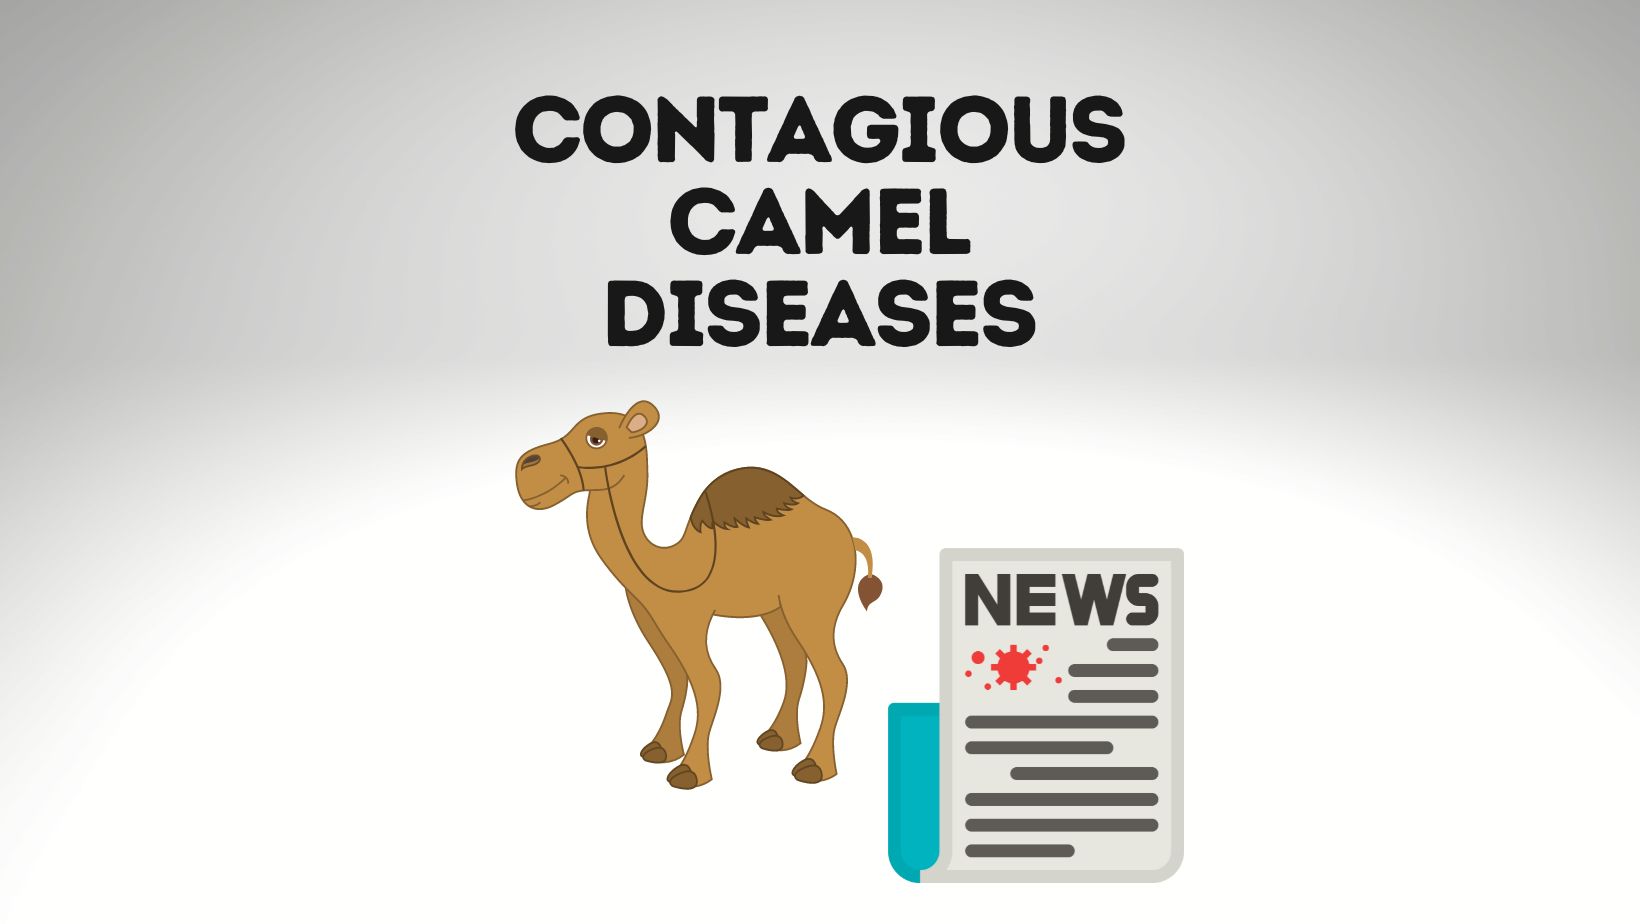 Contagious Camel Diseases